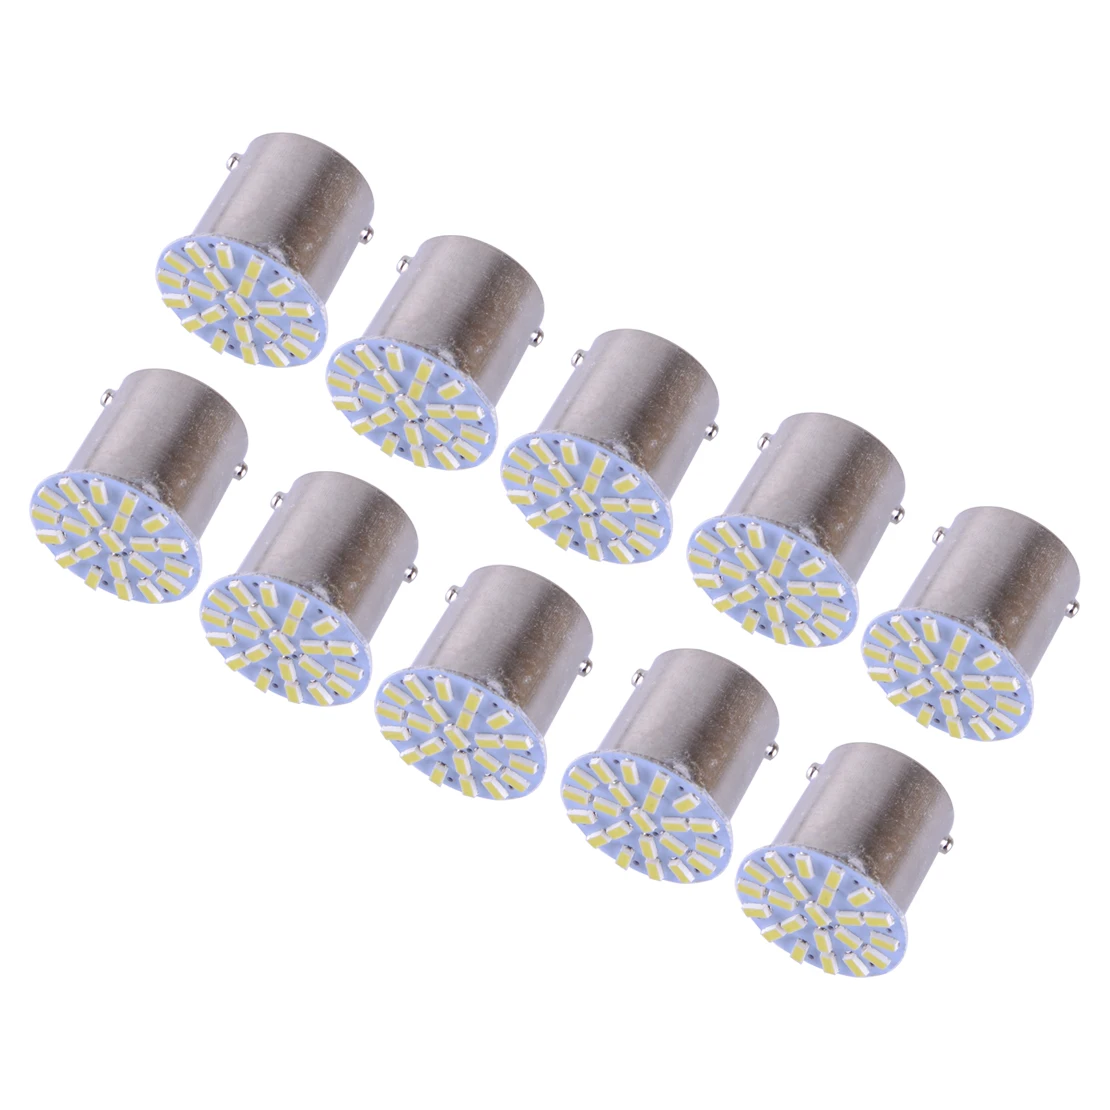 

40Pcs LED Tail Turn Signal Backup Light Bulbs For Car RV Trailer Truck Motorcycle Scooter Motorhome SUV 1156 BA15S P21W 22SMD